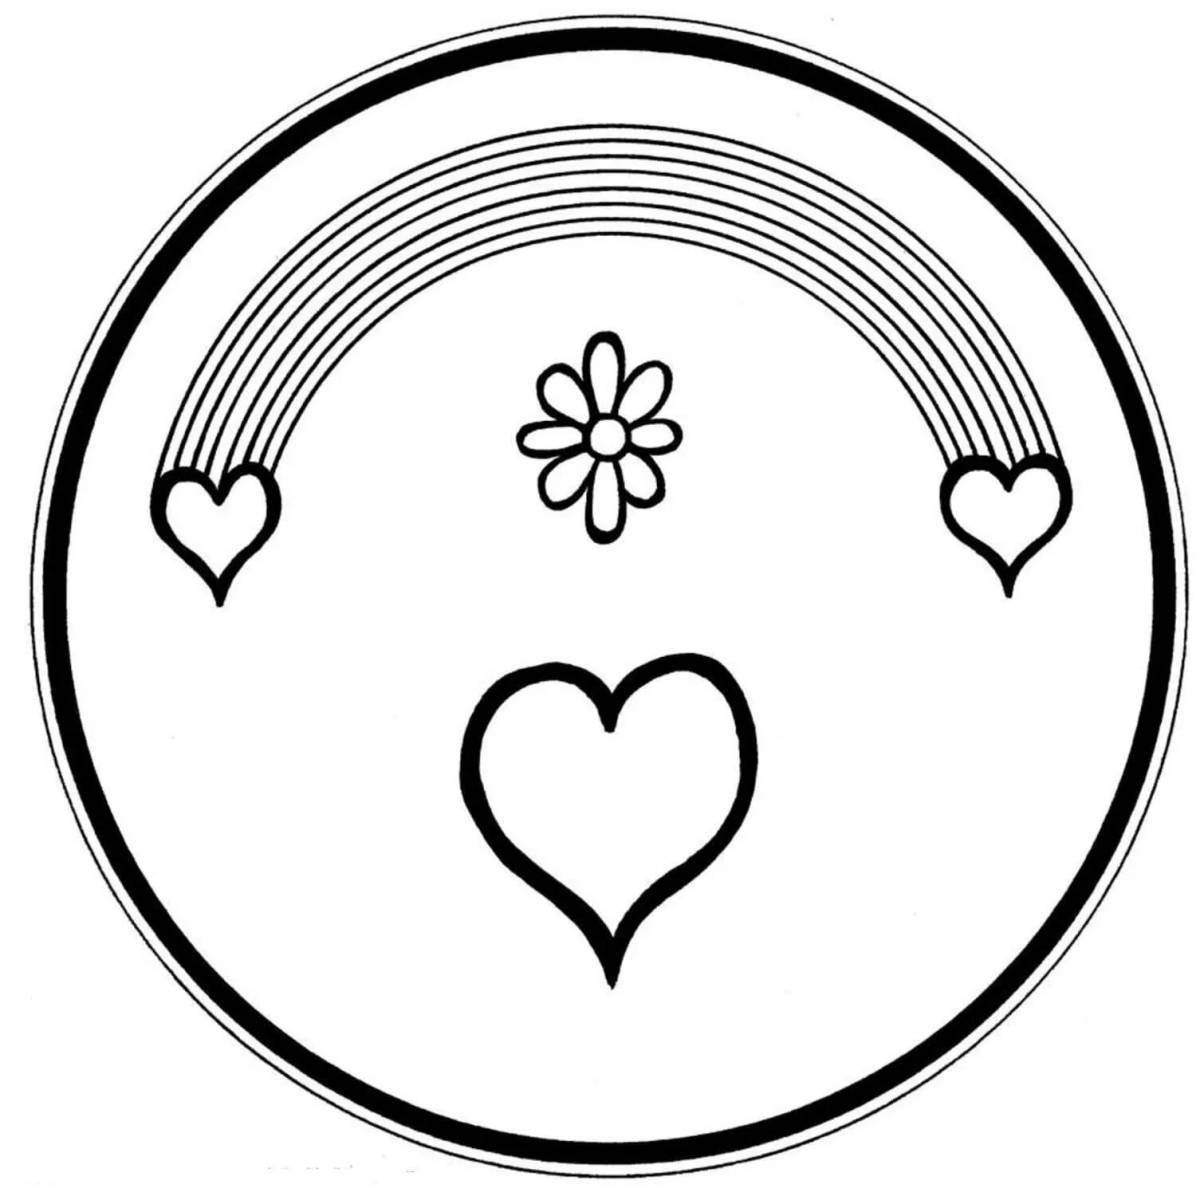 Coloring page joyful heart and star